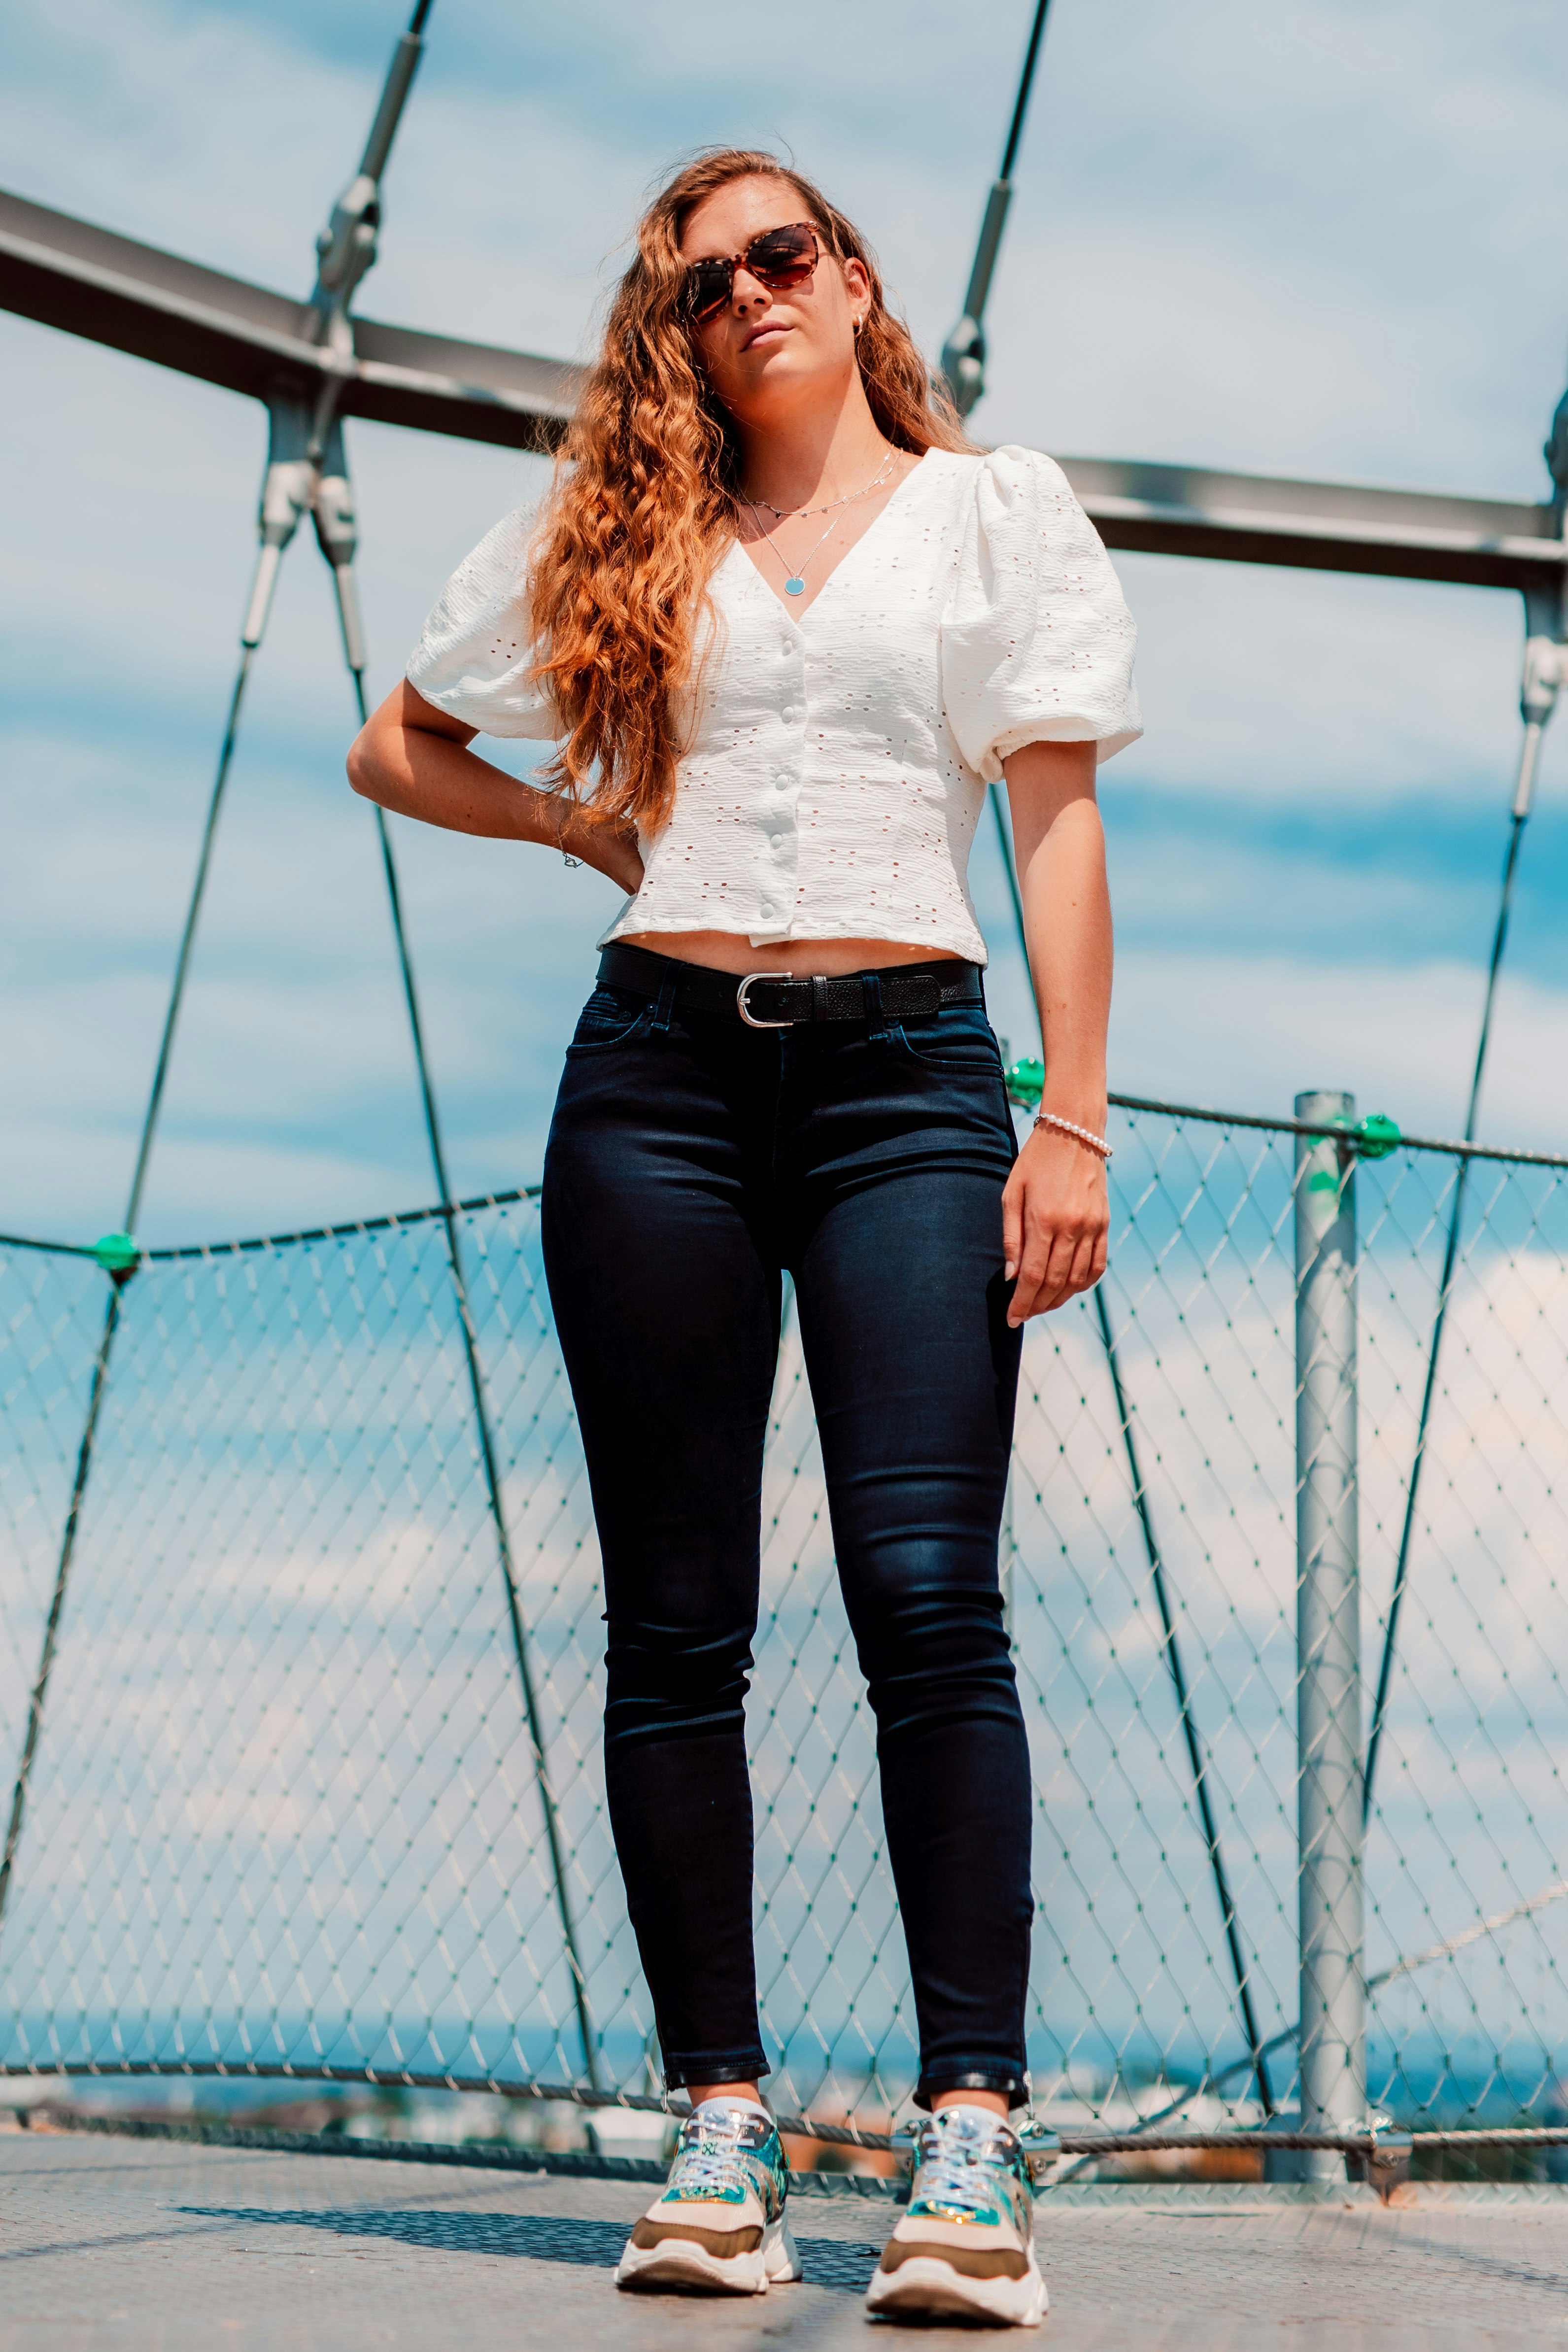 woman in white shirt and black denim jeans standing on blue metal bridge during daytime